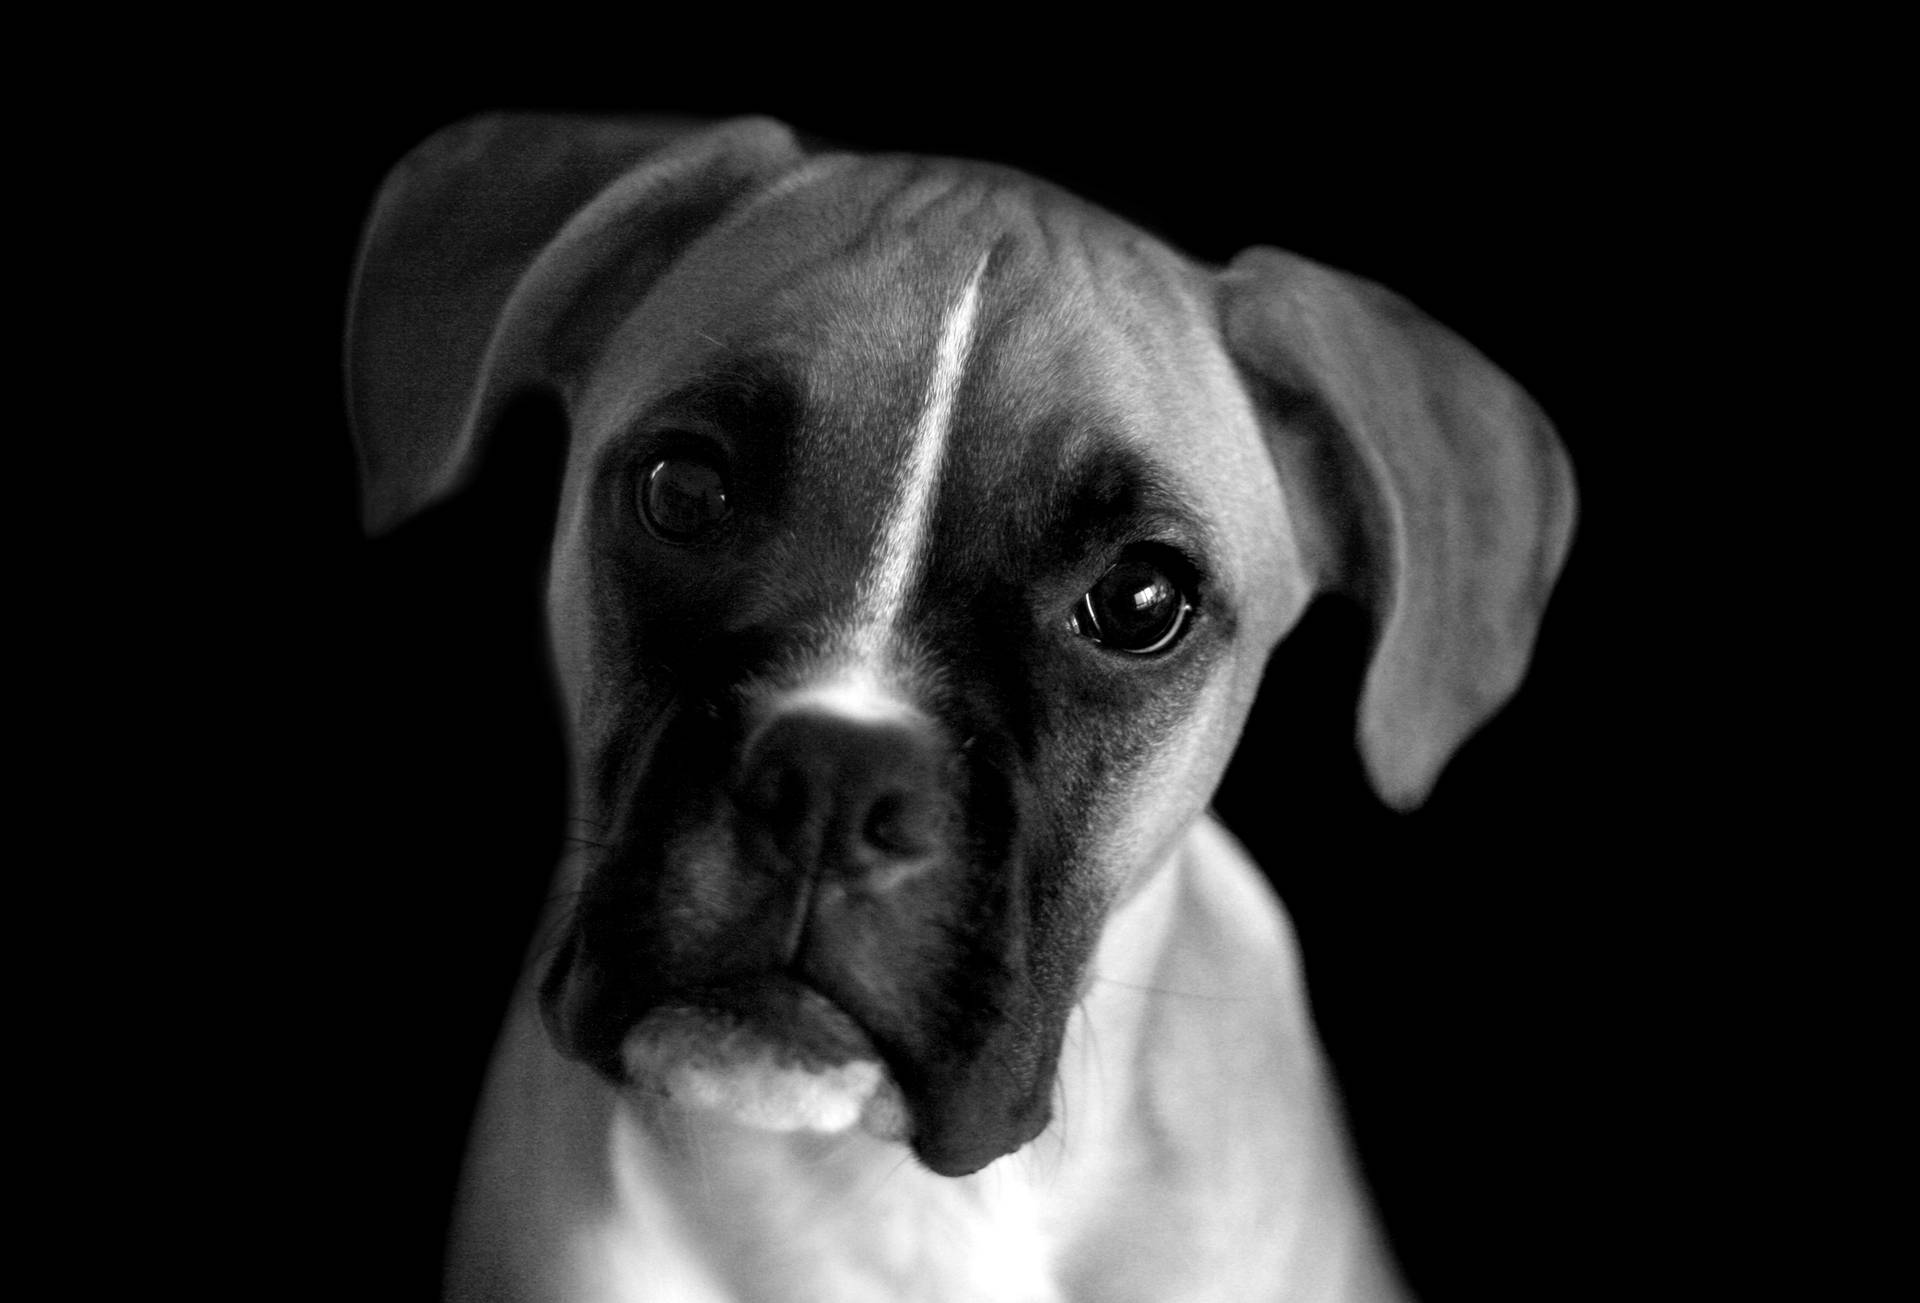 Black And White Dog With Puppy Eyes Background